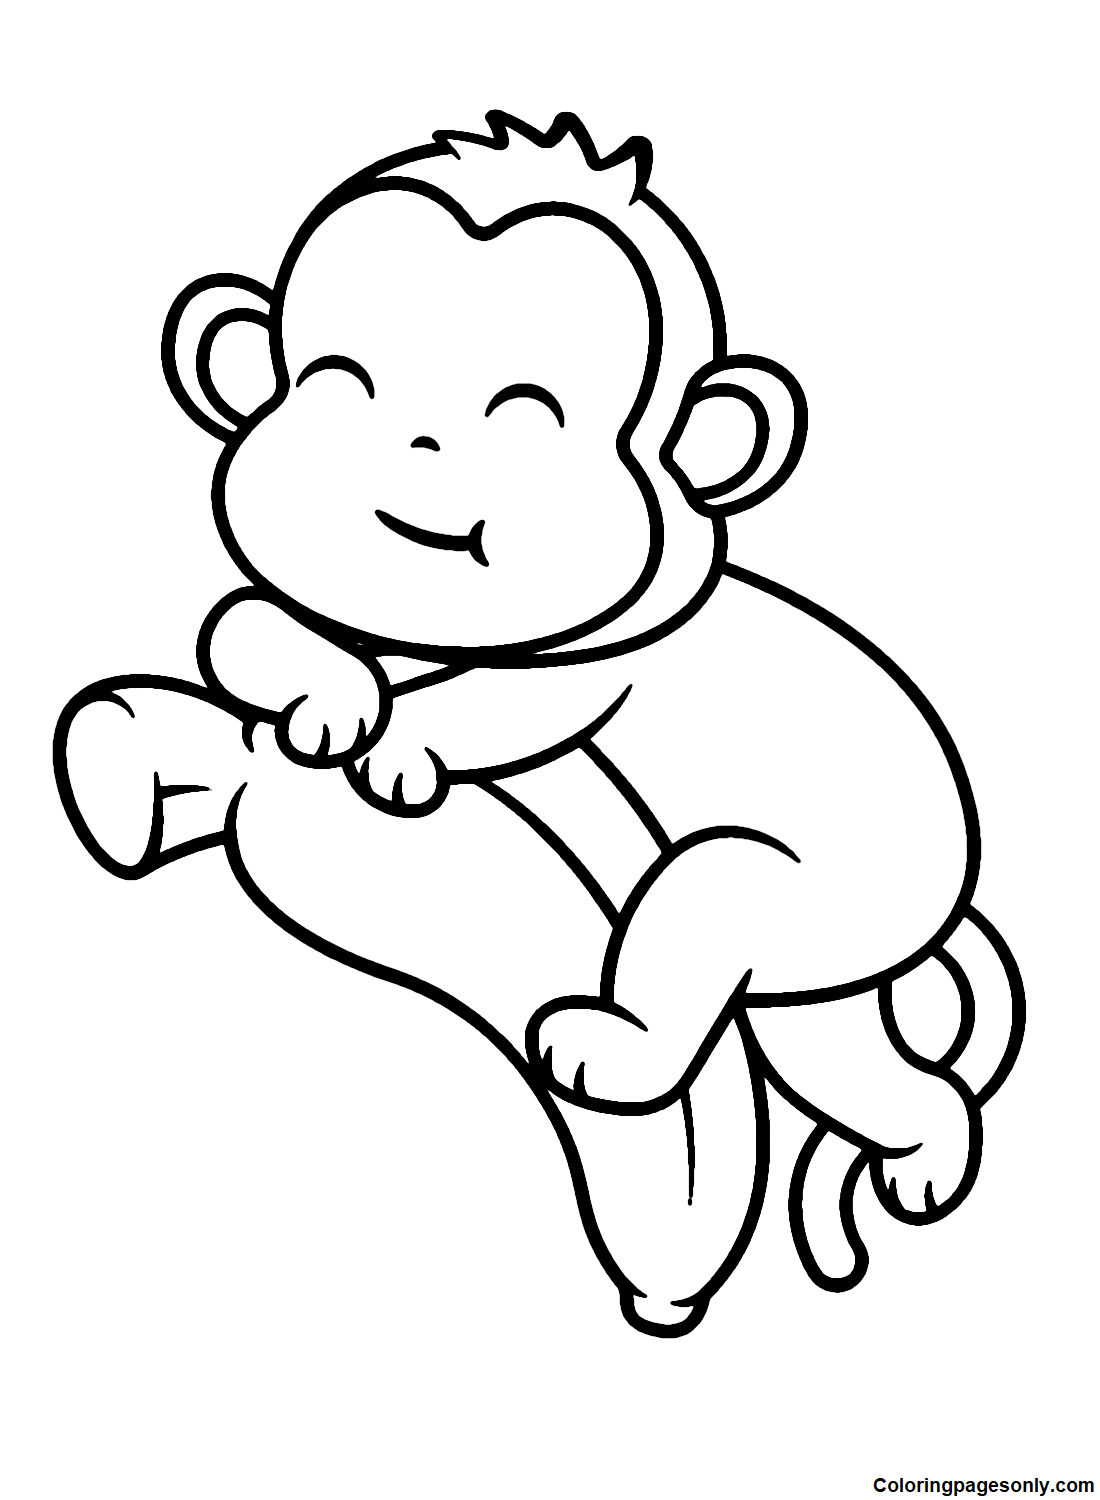 Cute Monkey with Banana Coloring Page